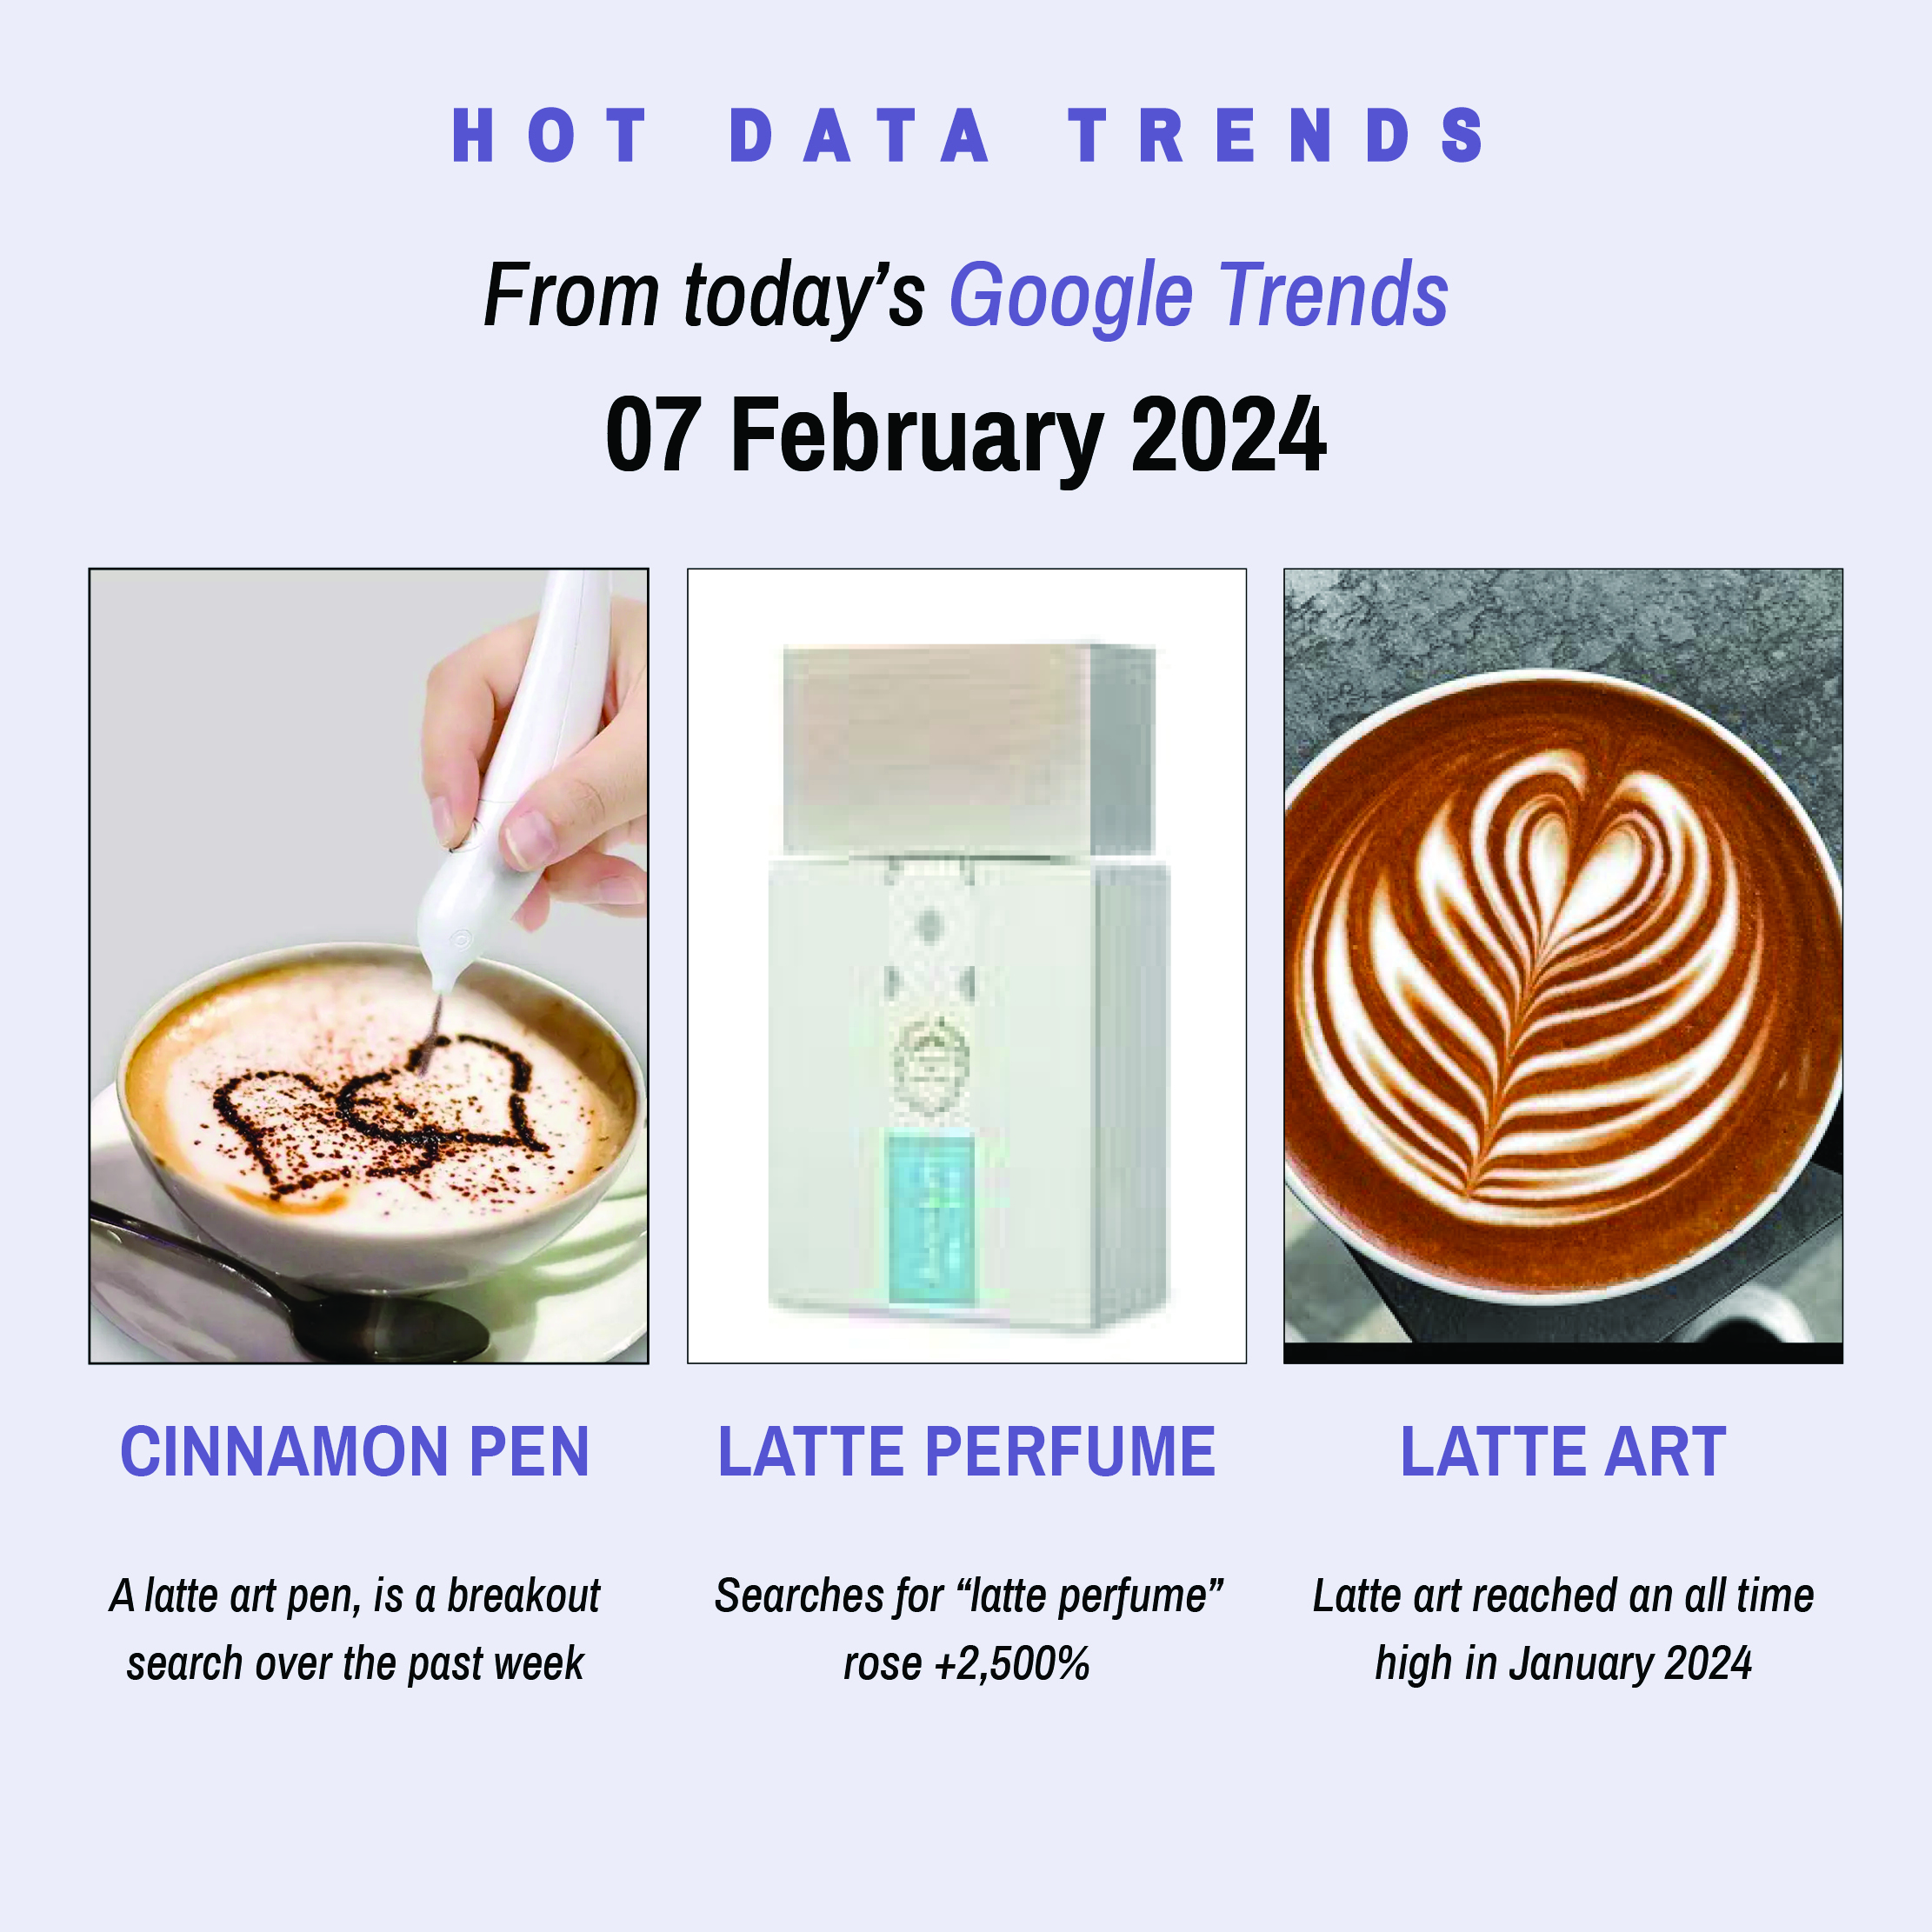 Cinnamon pen - A latte art pen, is a breakout search over the past week Latte perfume - Searches for “latte perfume” rose +2,500% Latte art - Latte art reached an all time high in January 2024